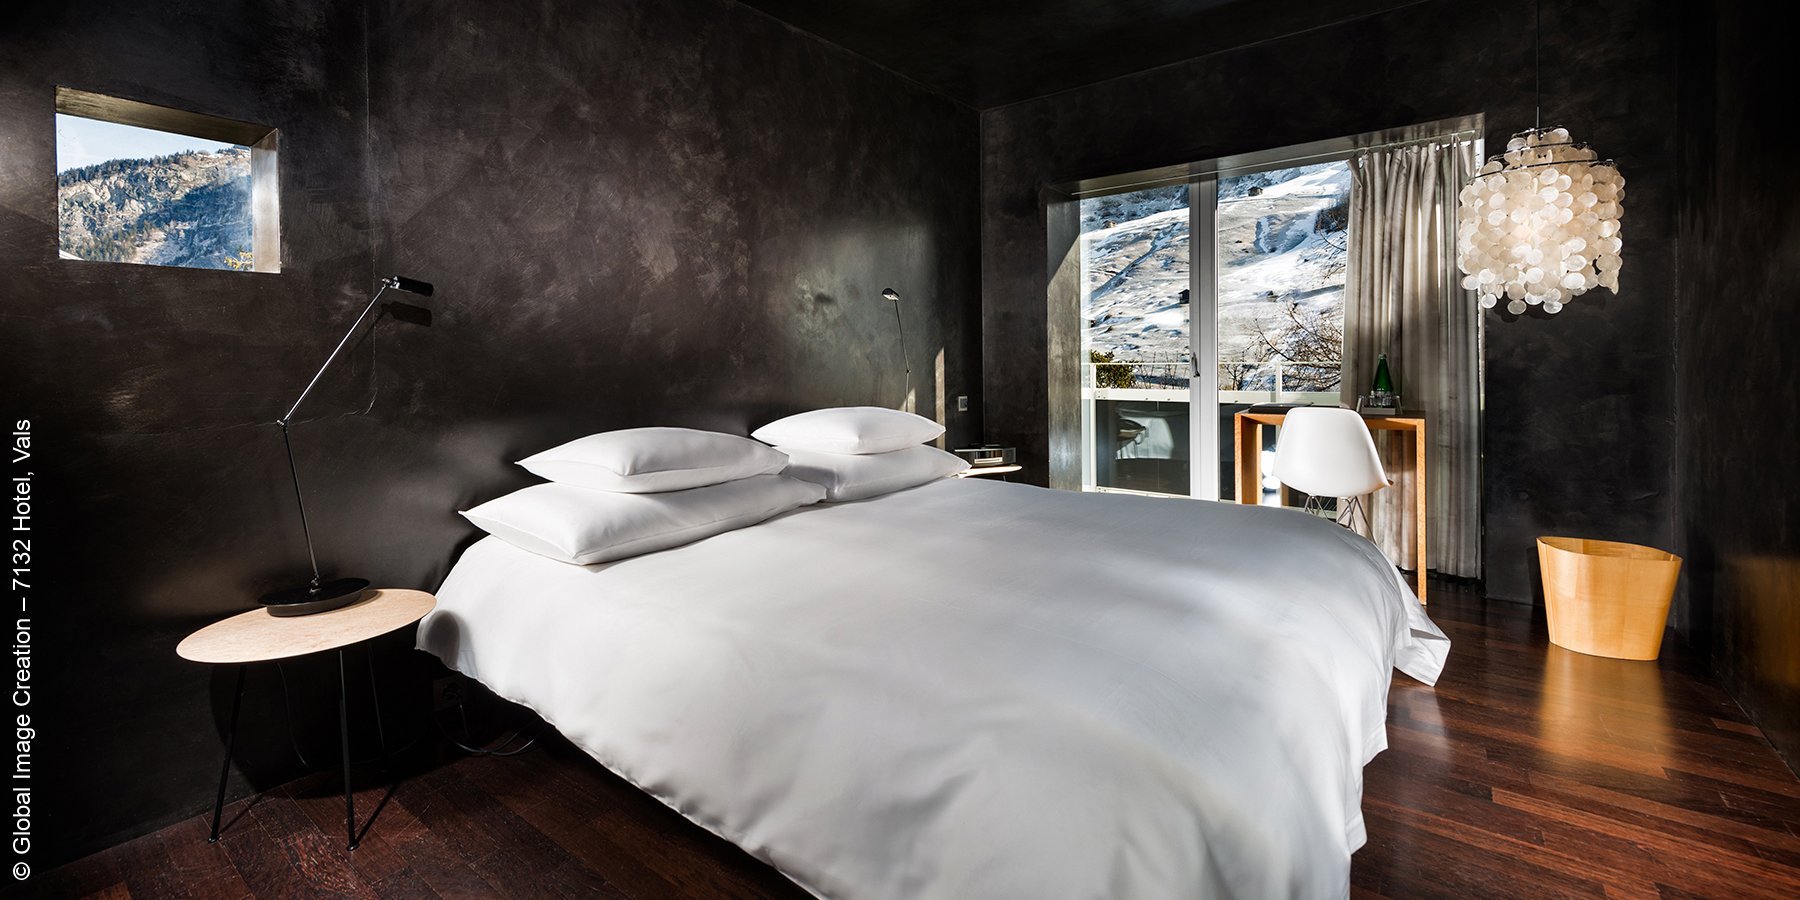 7132 Hotel | Vals | House of Architects Bedroom | luxuszeit.com